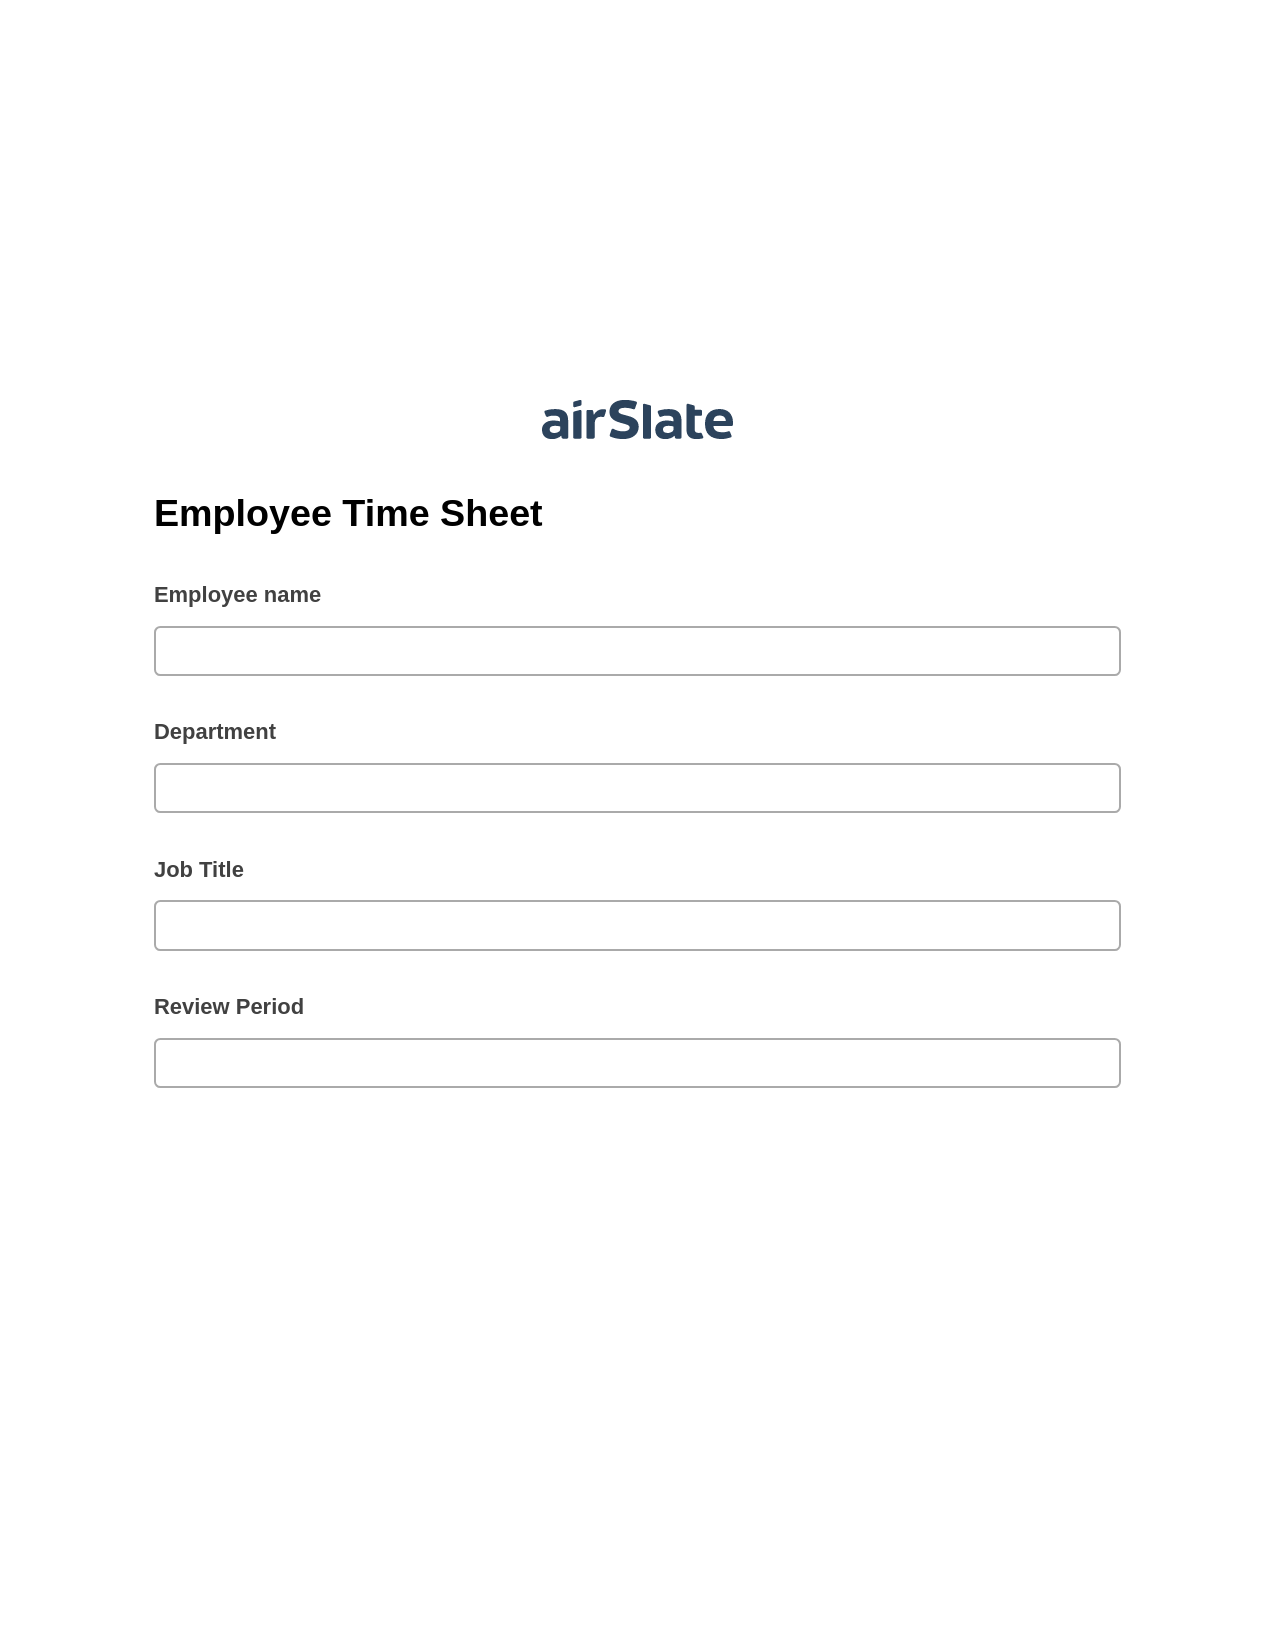 Employee Time Sheet Pre-fill Dropdowns from Airtable, Invoke Salesforce Process Bot, Archive to Dropbox Bot